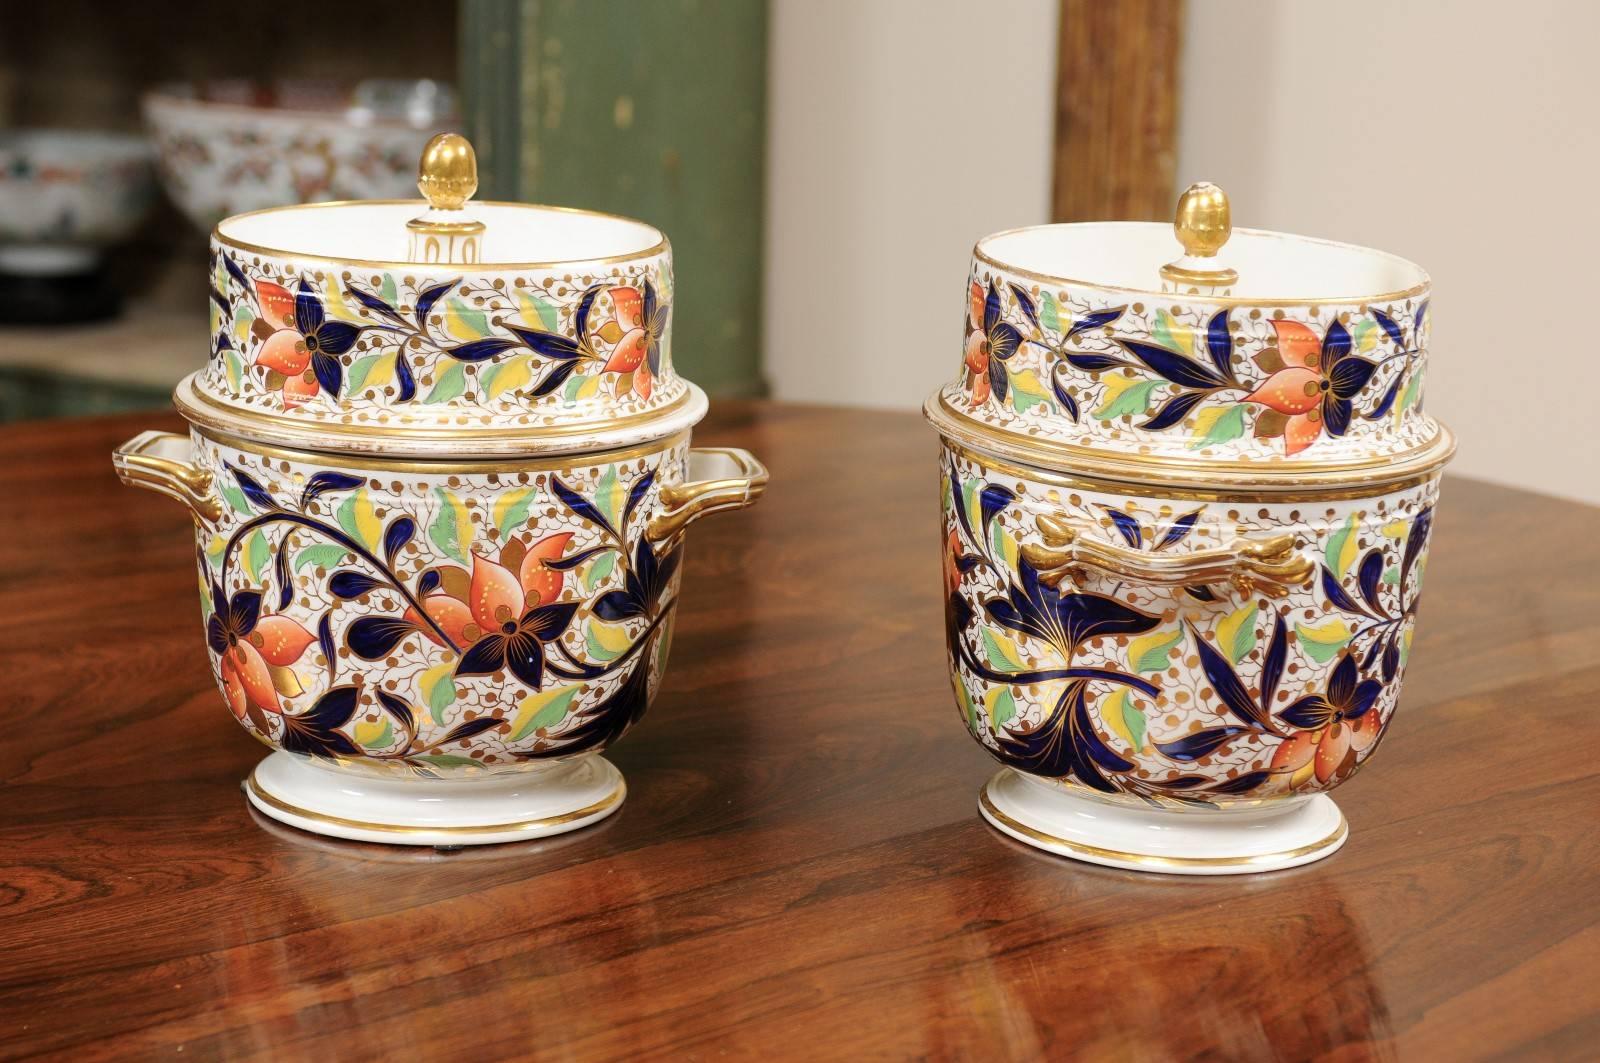 Pair of 19th Century English Derby Fruit Coolers with Lids & Liners, ca. 1815 For Sale 4